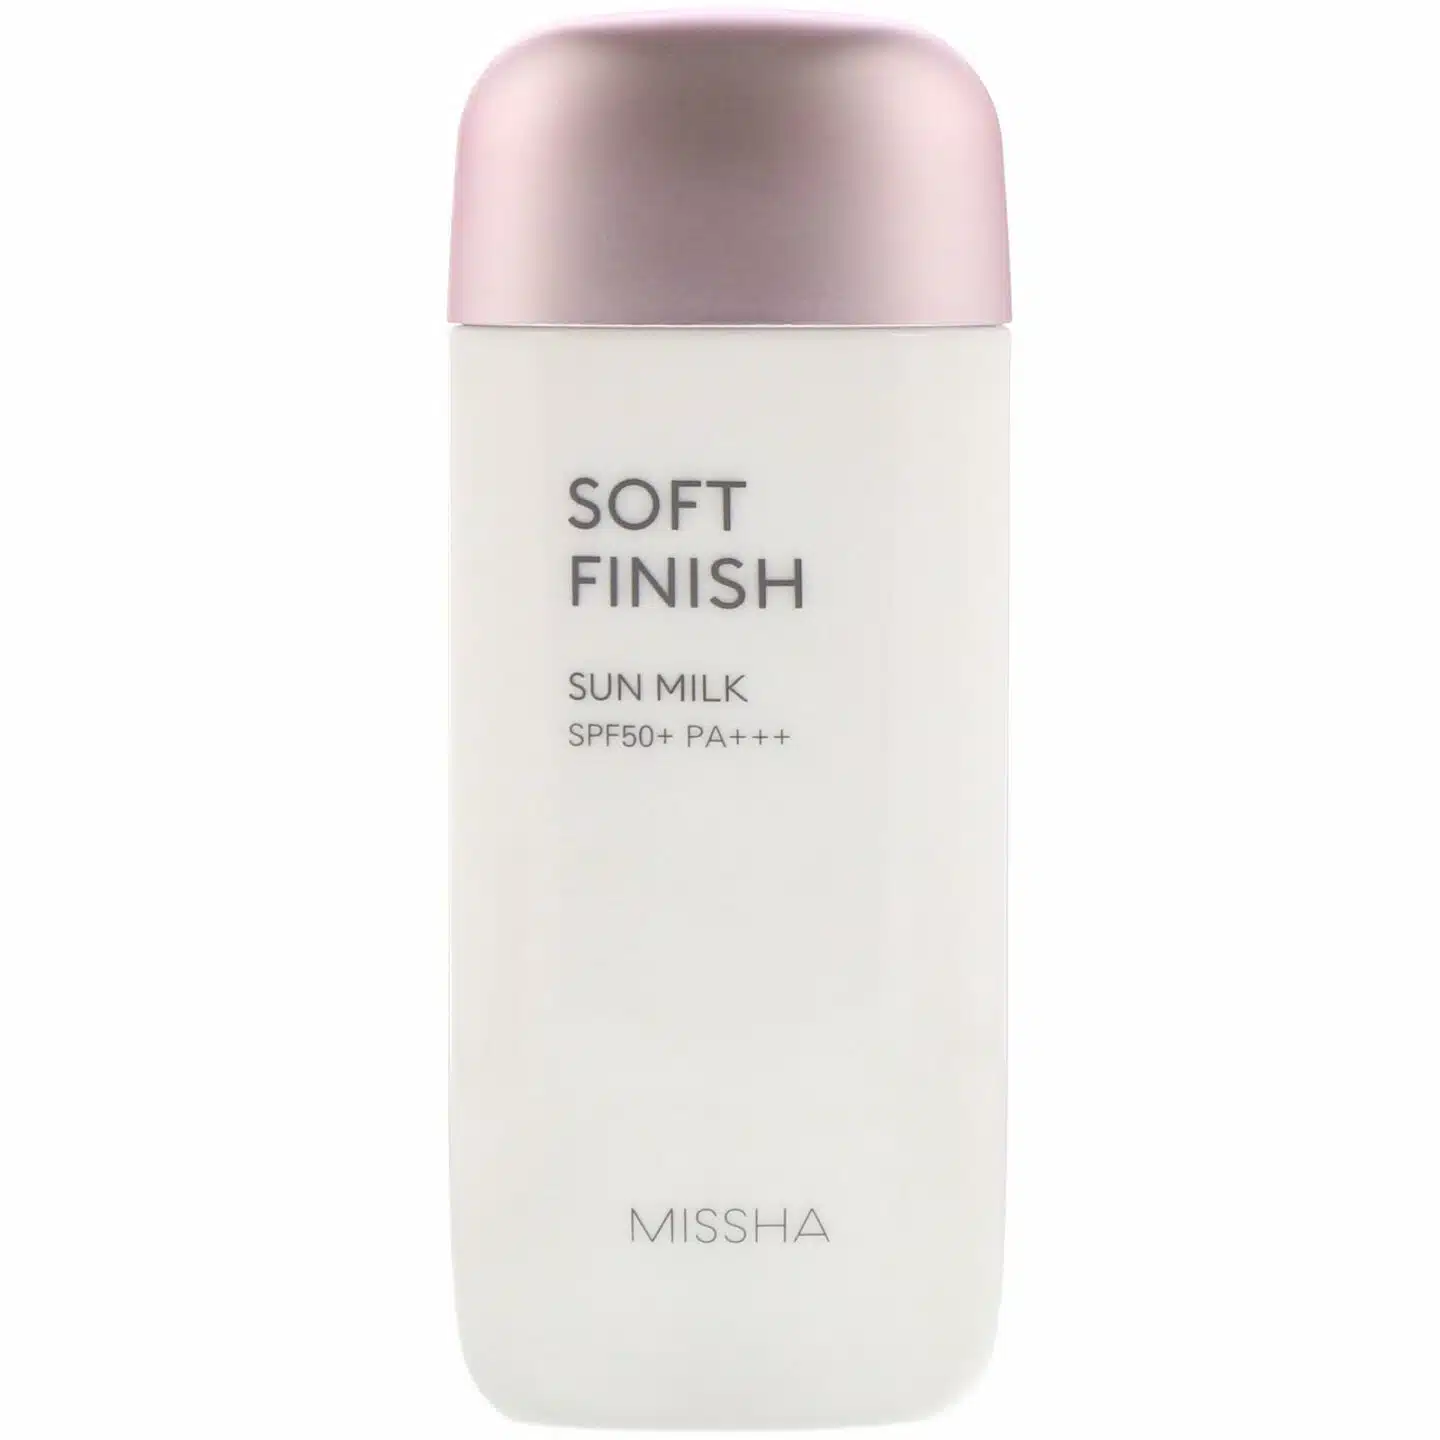 Best Korean sunscreen for oily skin, by beauty blogger What The Fab